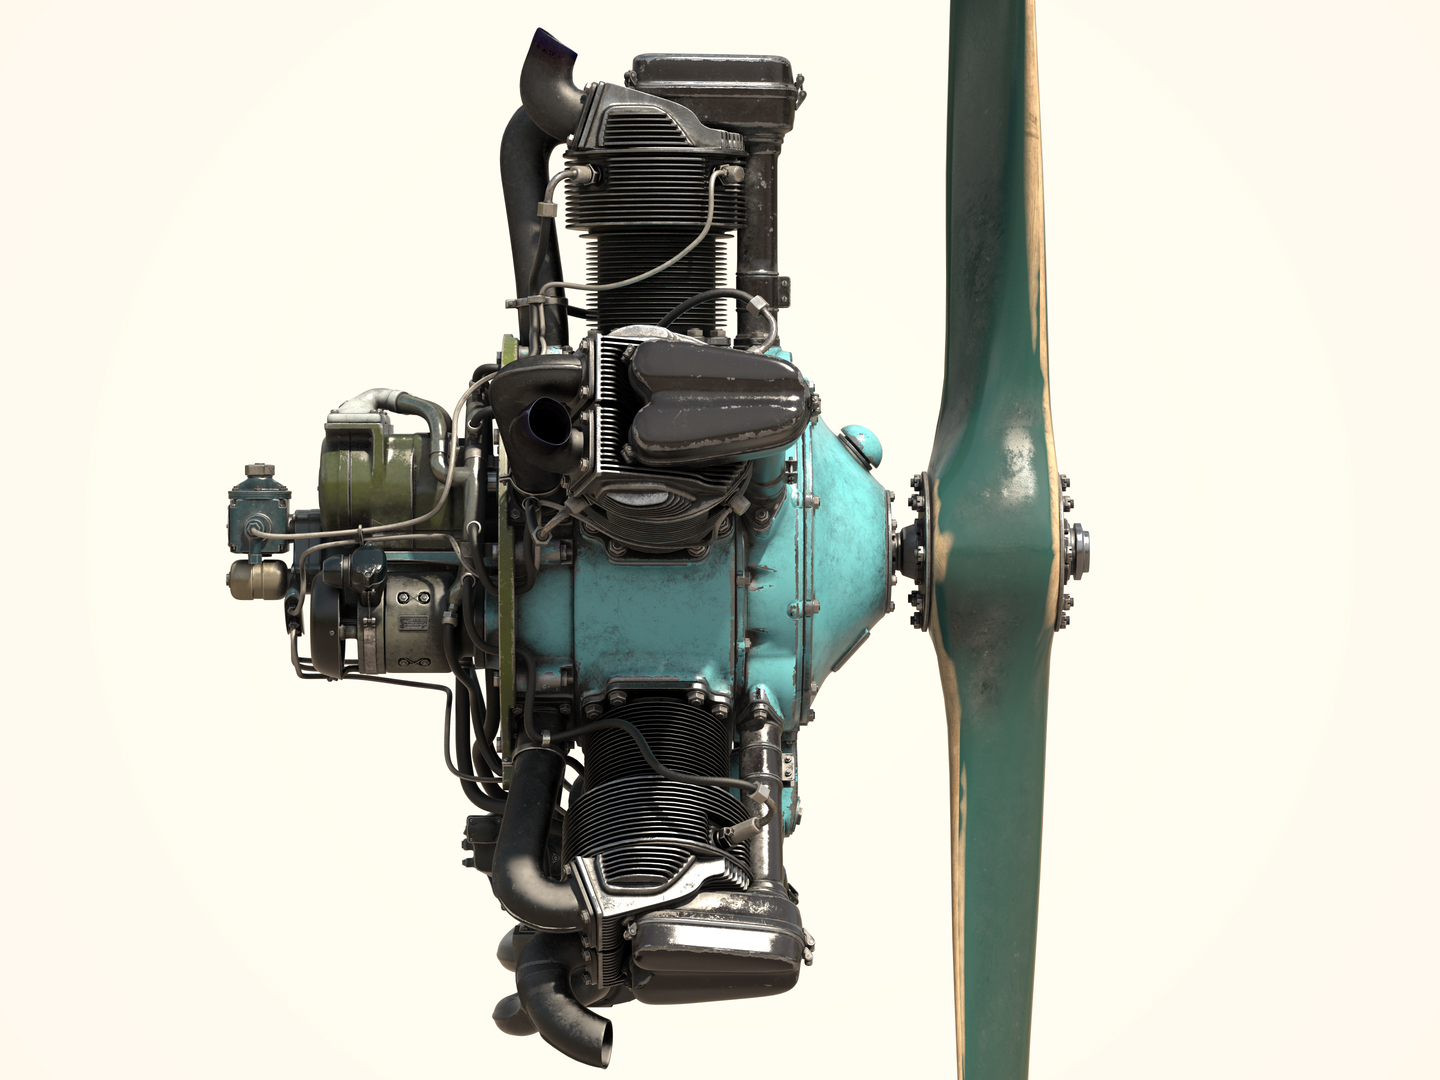 Aircraft engine M-11 3D model in 3d max vray 2.5 image